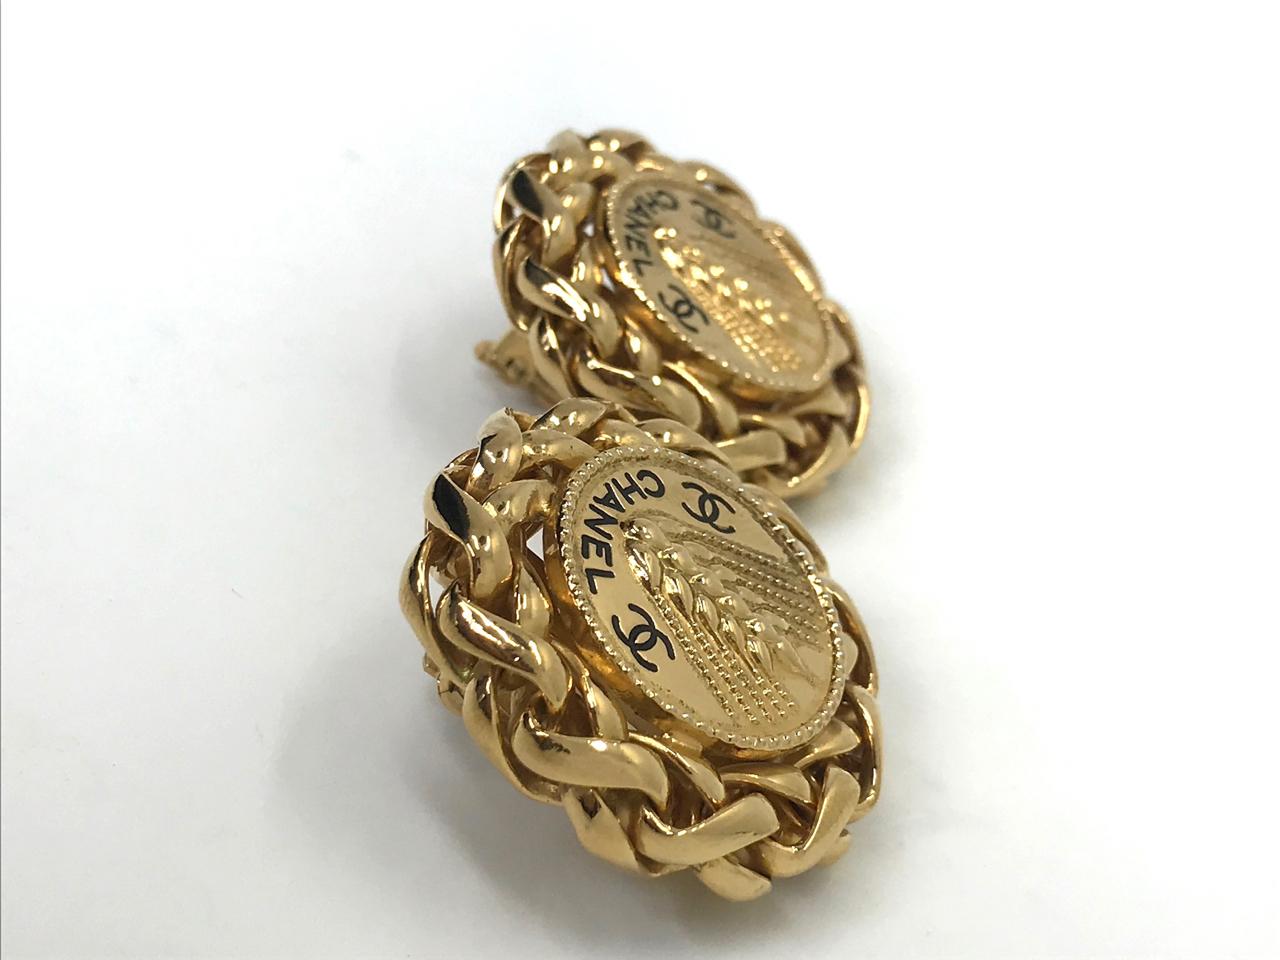 Chanel 1980s vintage gold plated CC logo clip on earrings with rare wheat design. Features both the chanel name and CC logo on each earring.  Stamped 'chanel' on the reverse.  This is a stamp which was used on a select number of pieces in the 70s